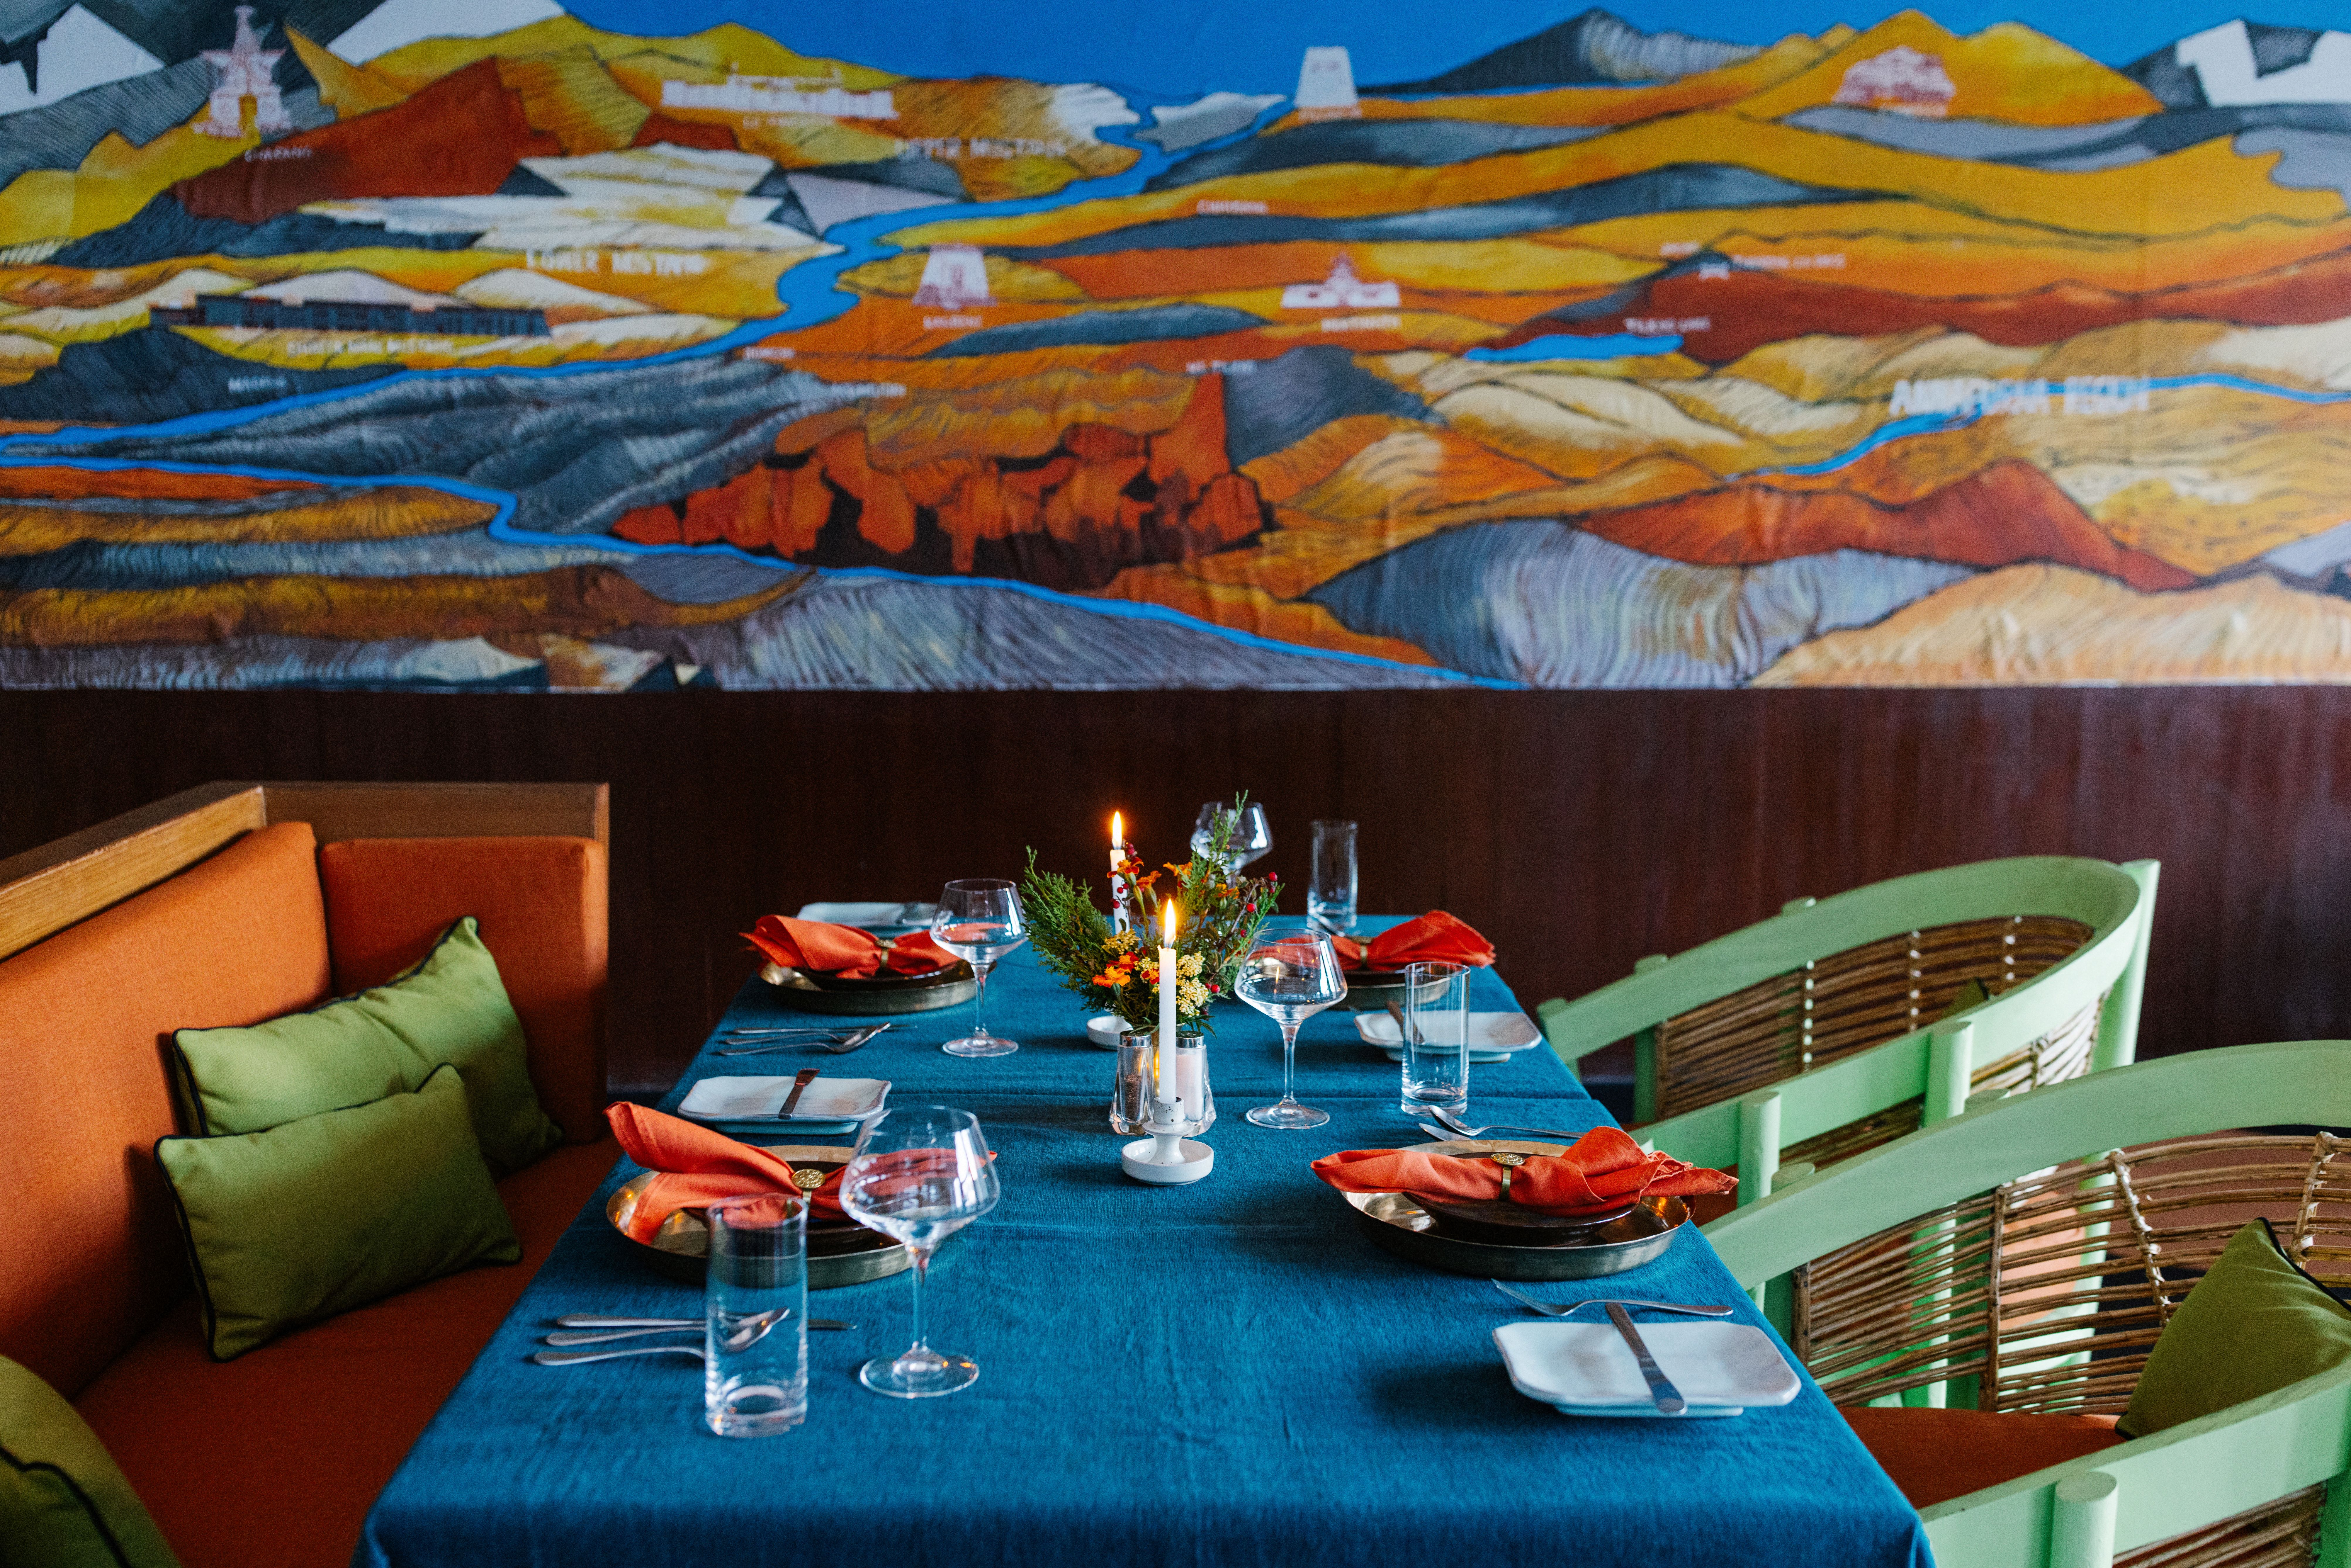 Nilgiri restaruant with colourful table and seating